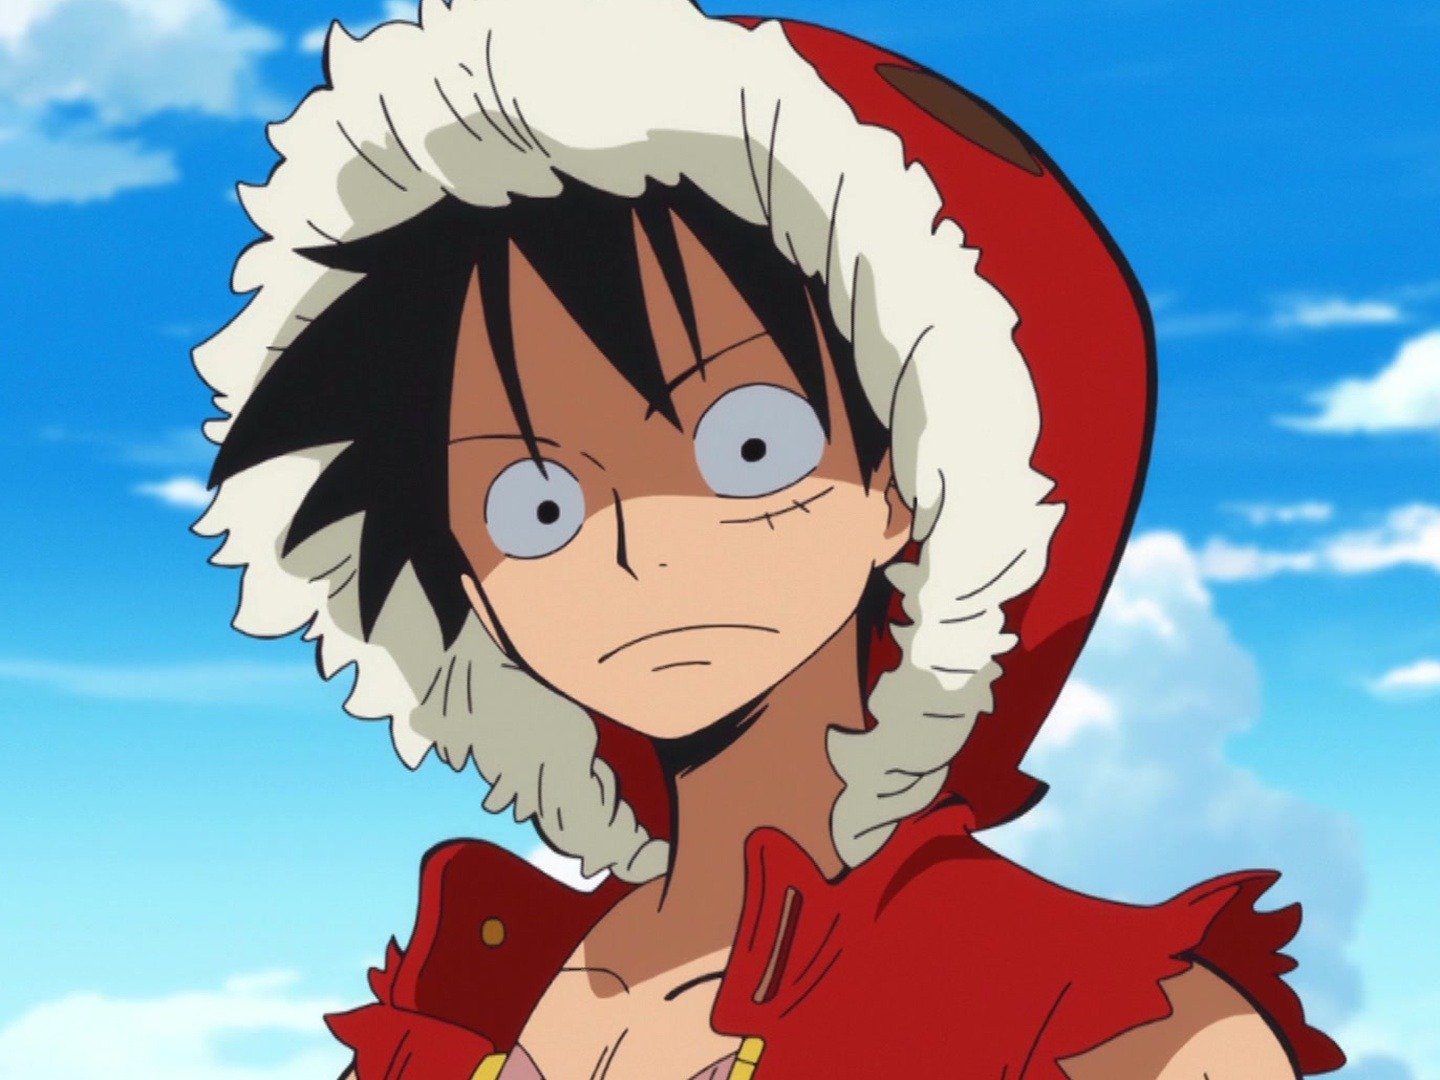 One Piece Art Brings the Anime's OG Style to Wano Country